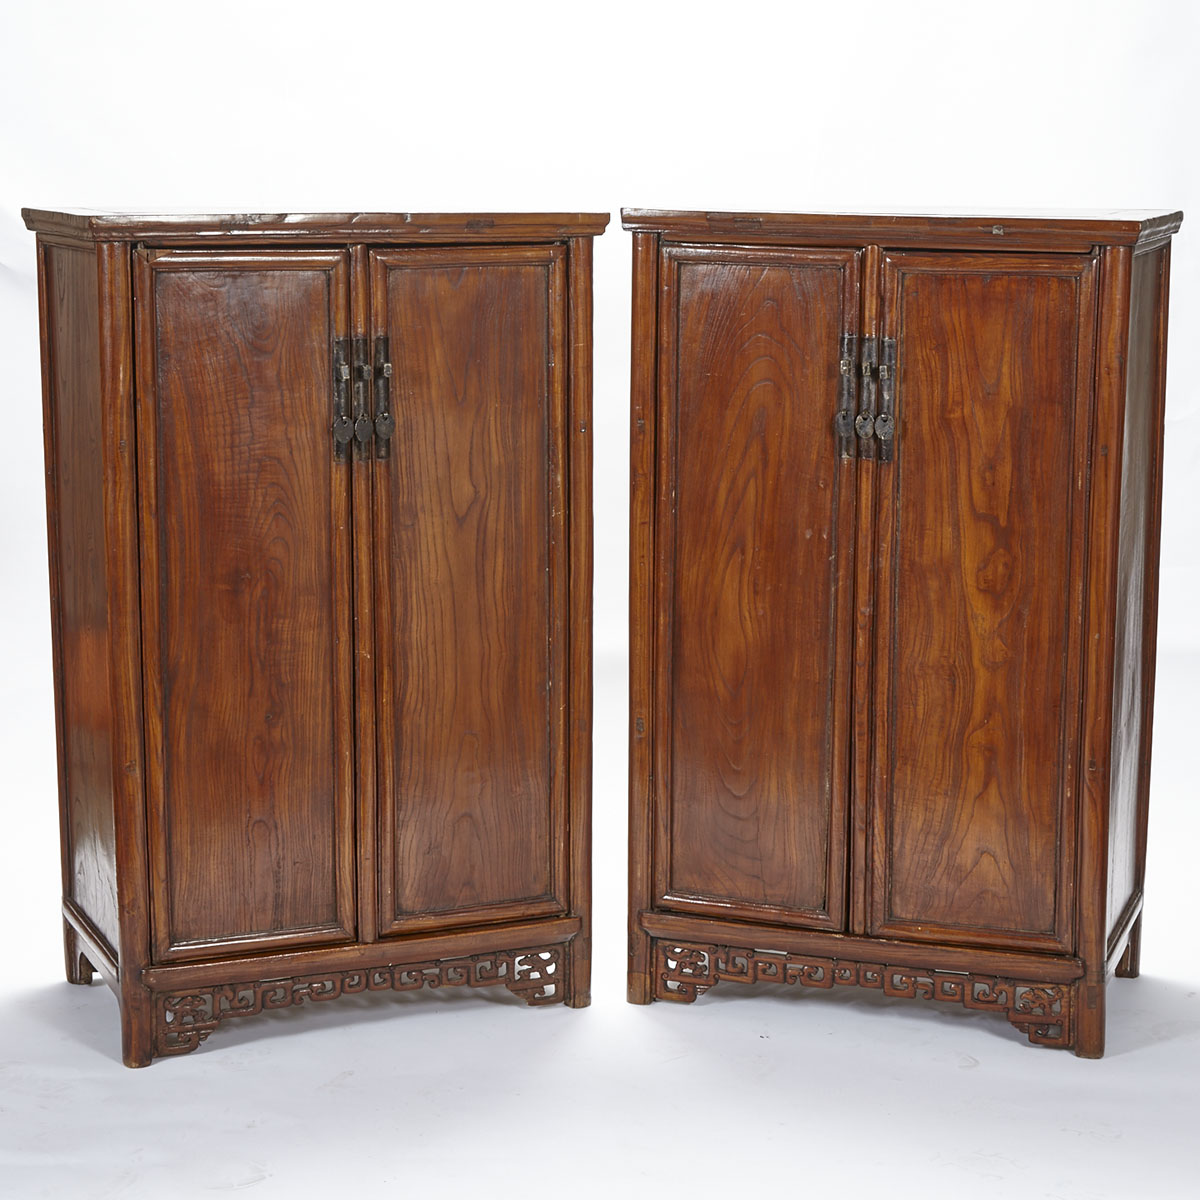 A Pair of Cabinets, Early 20th Century